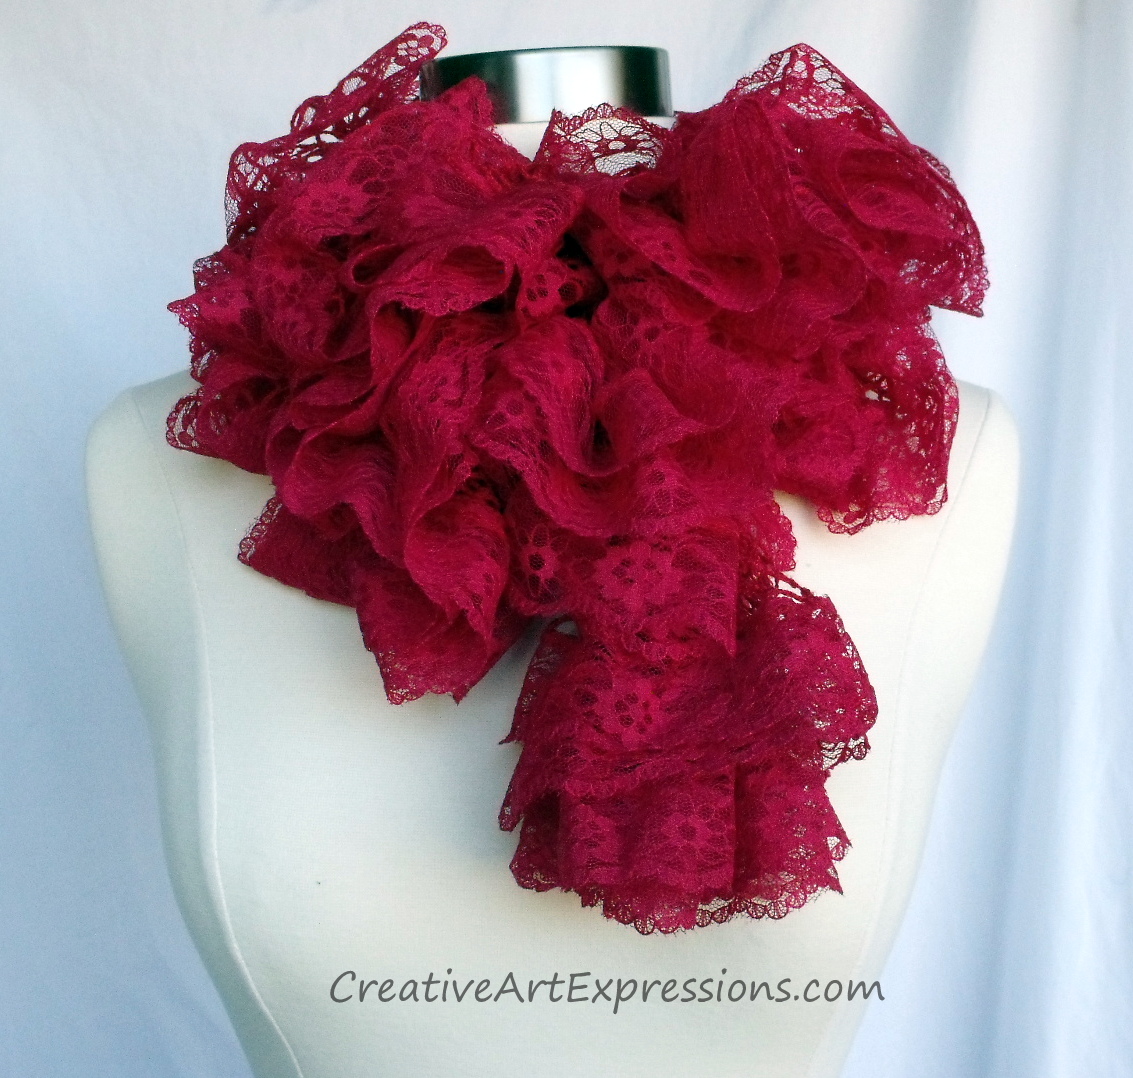 Creative Art Expressions Hand Knit Red Lace Ruffle Scarf